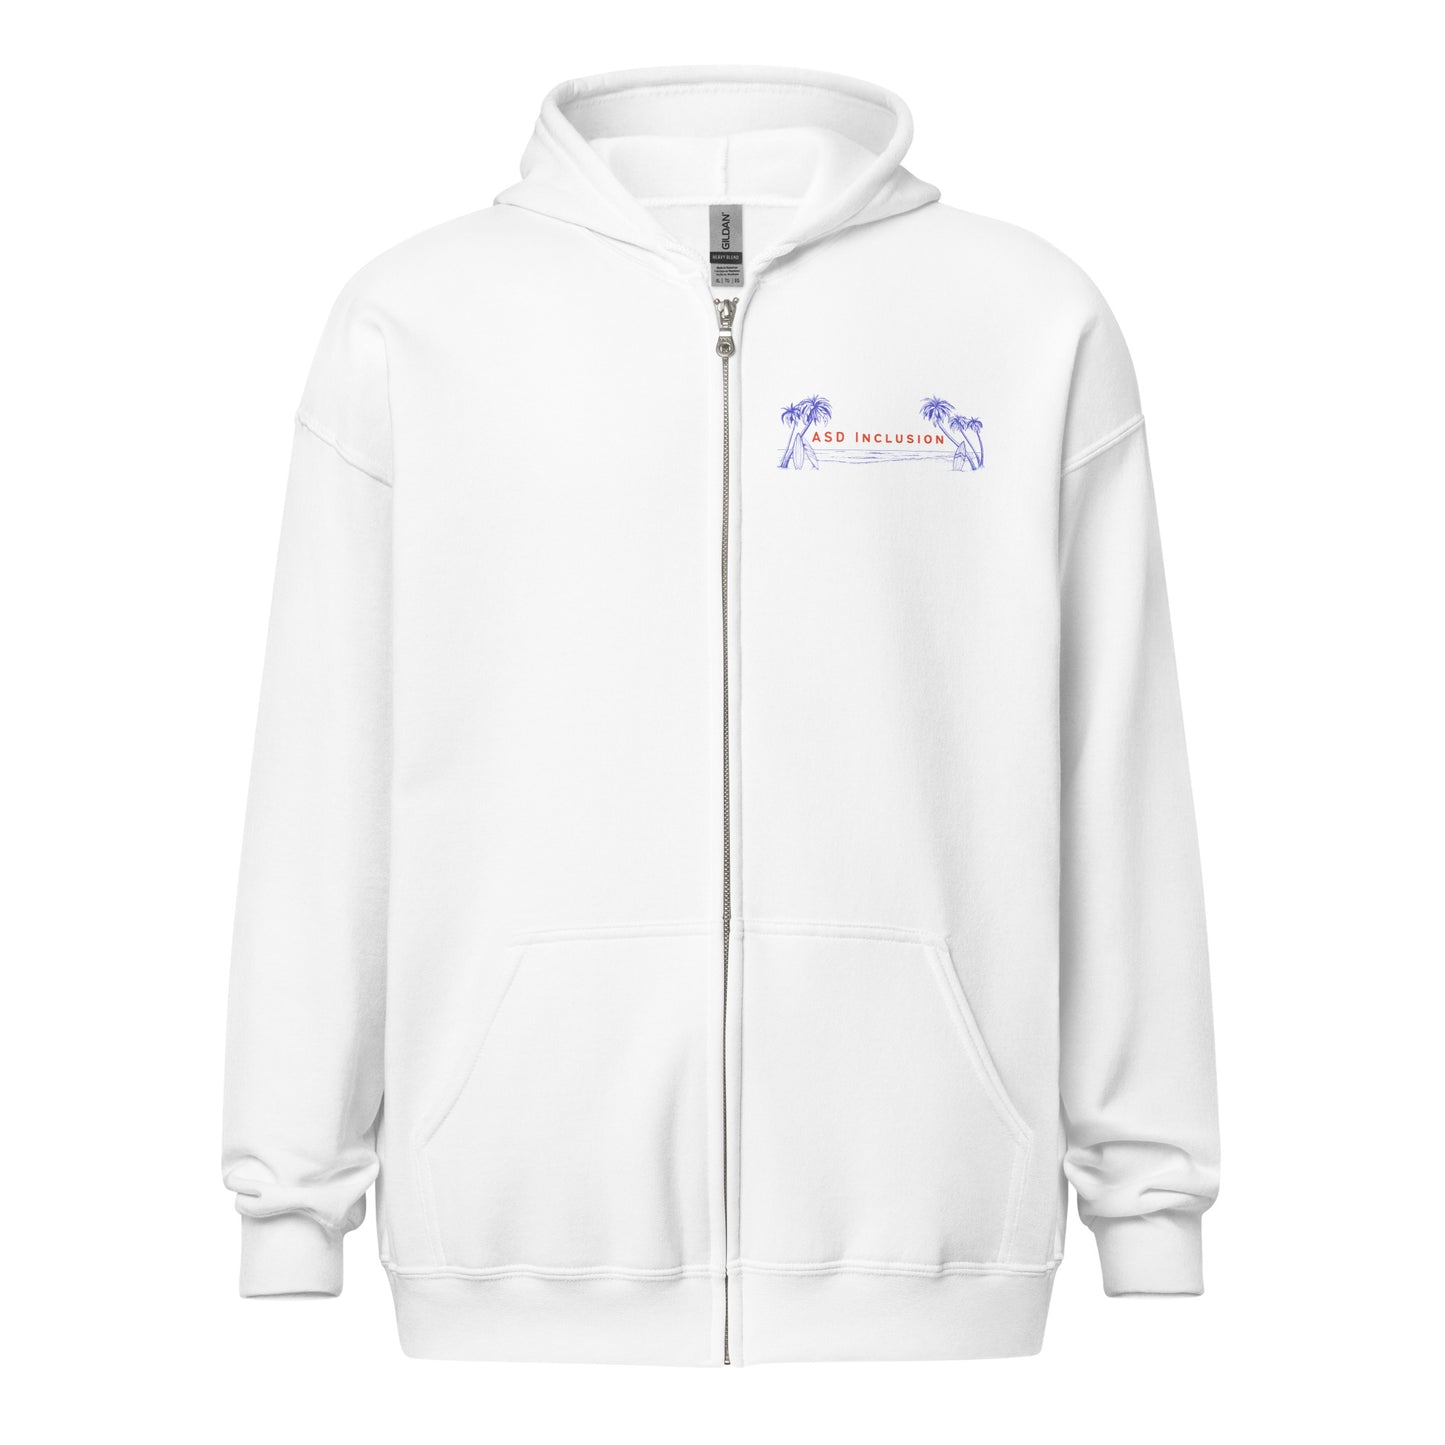 Catch The Wave Hoodie Front - ASD Inclusion 